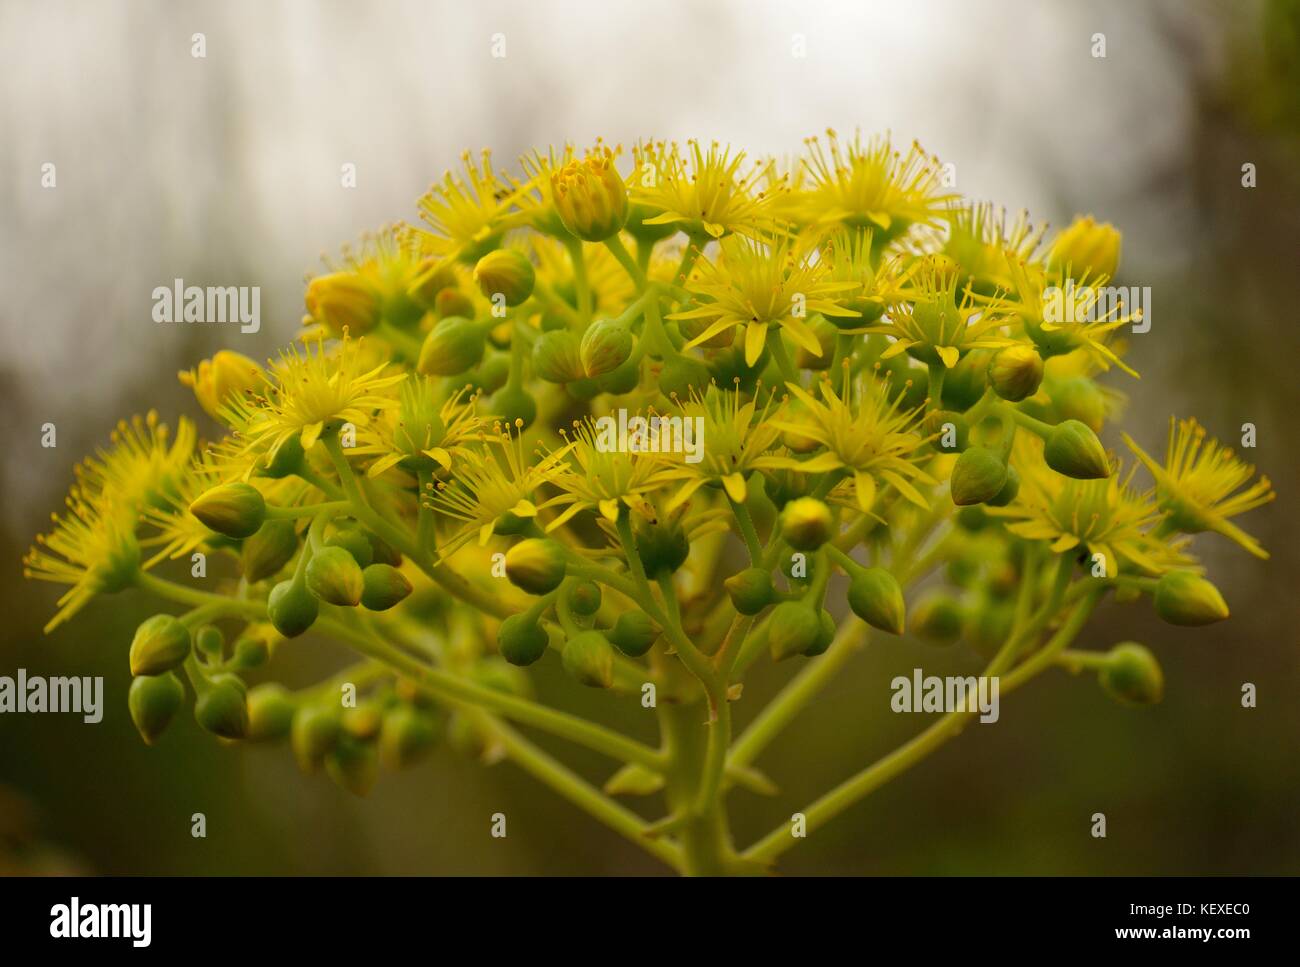 Beautiful flowers of aeonium in foreground, Canary islands Stock Photo